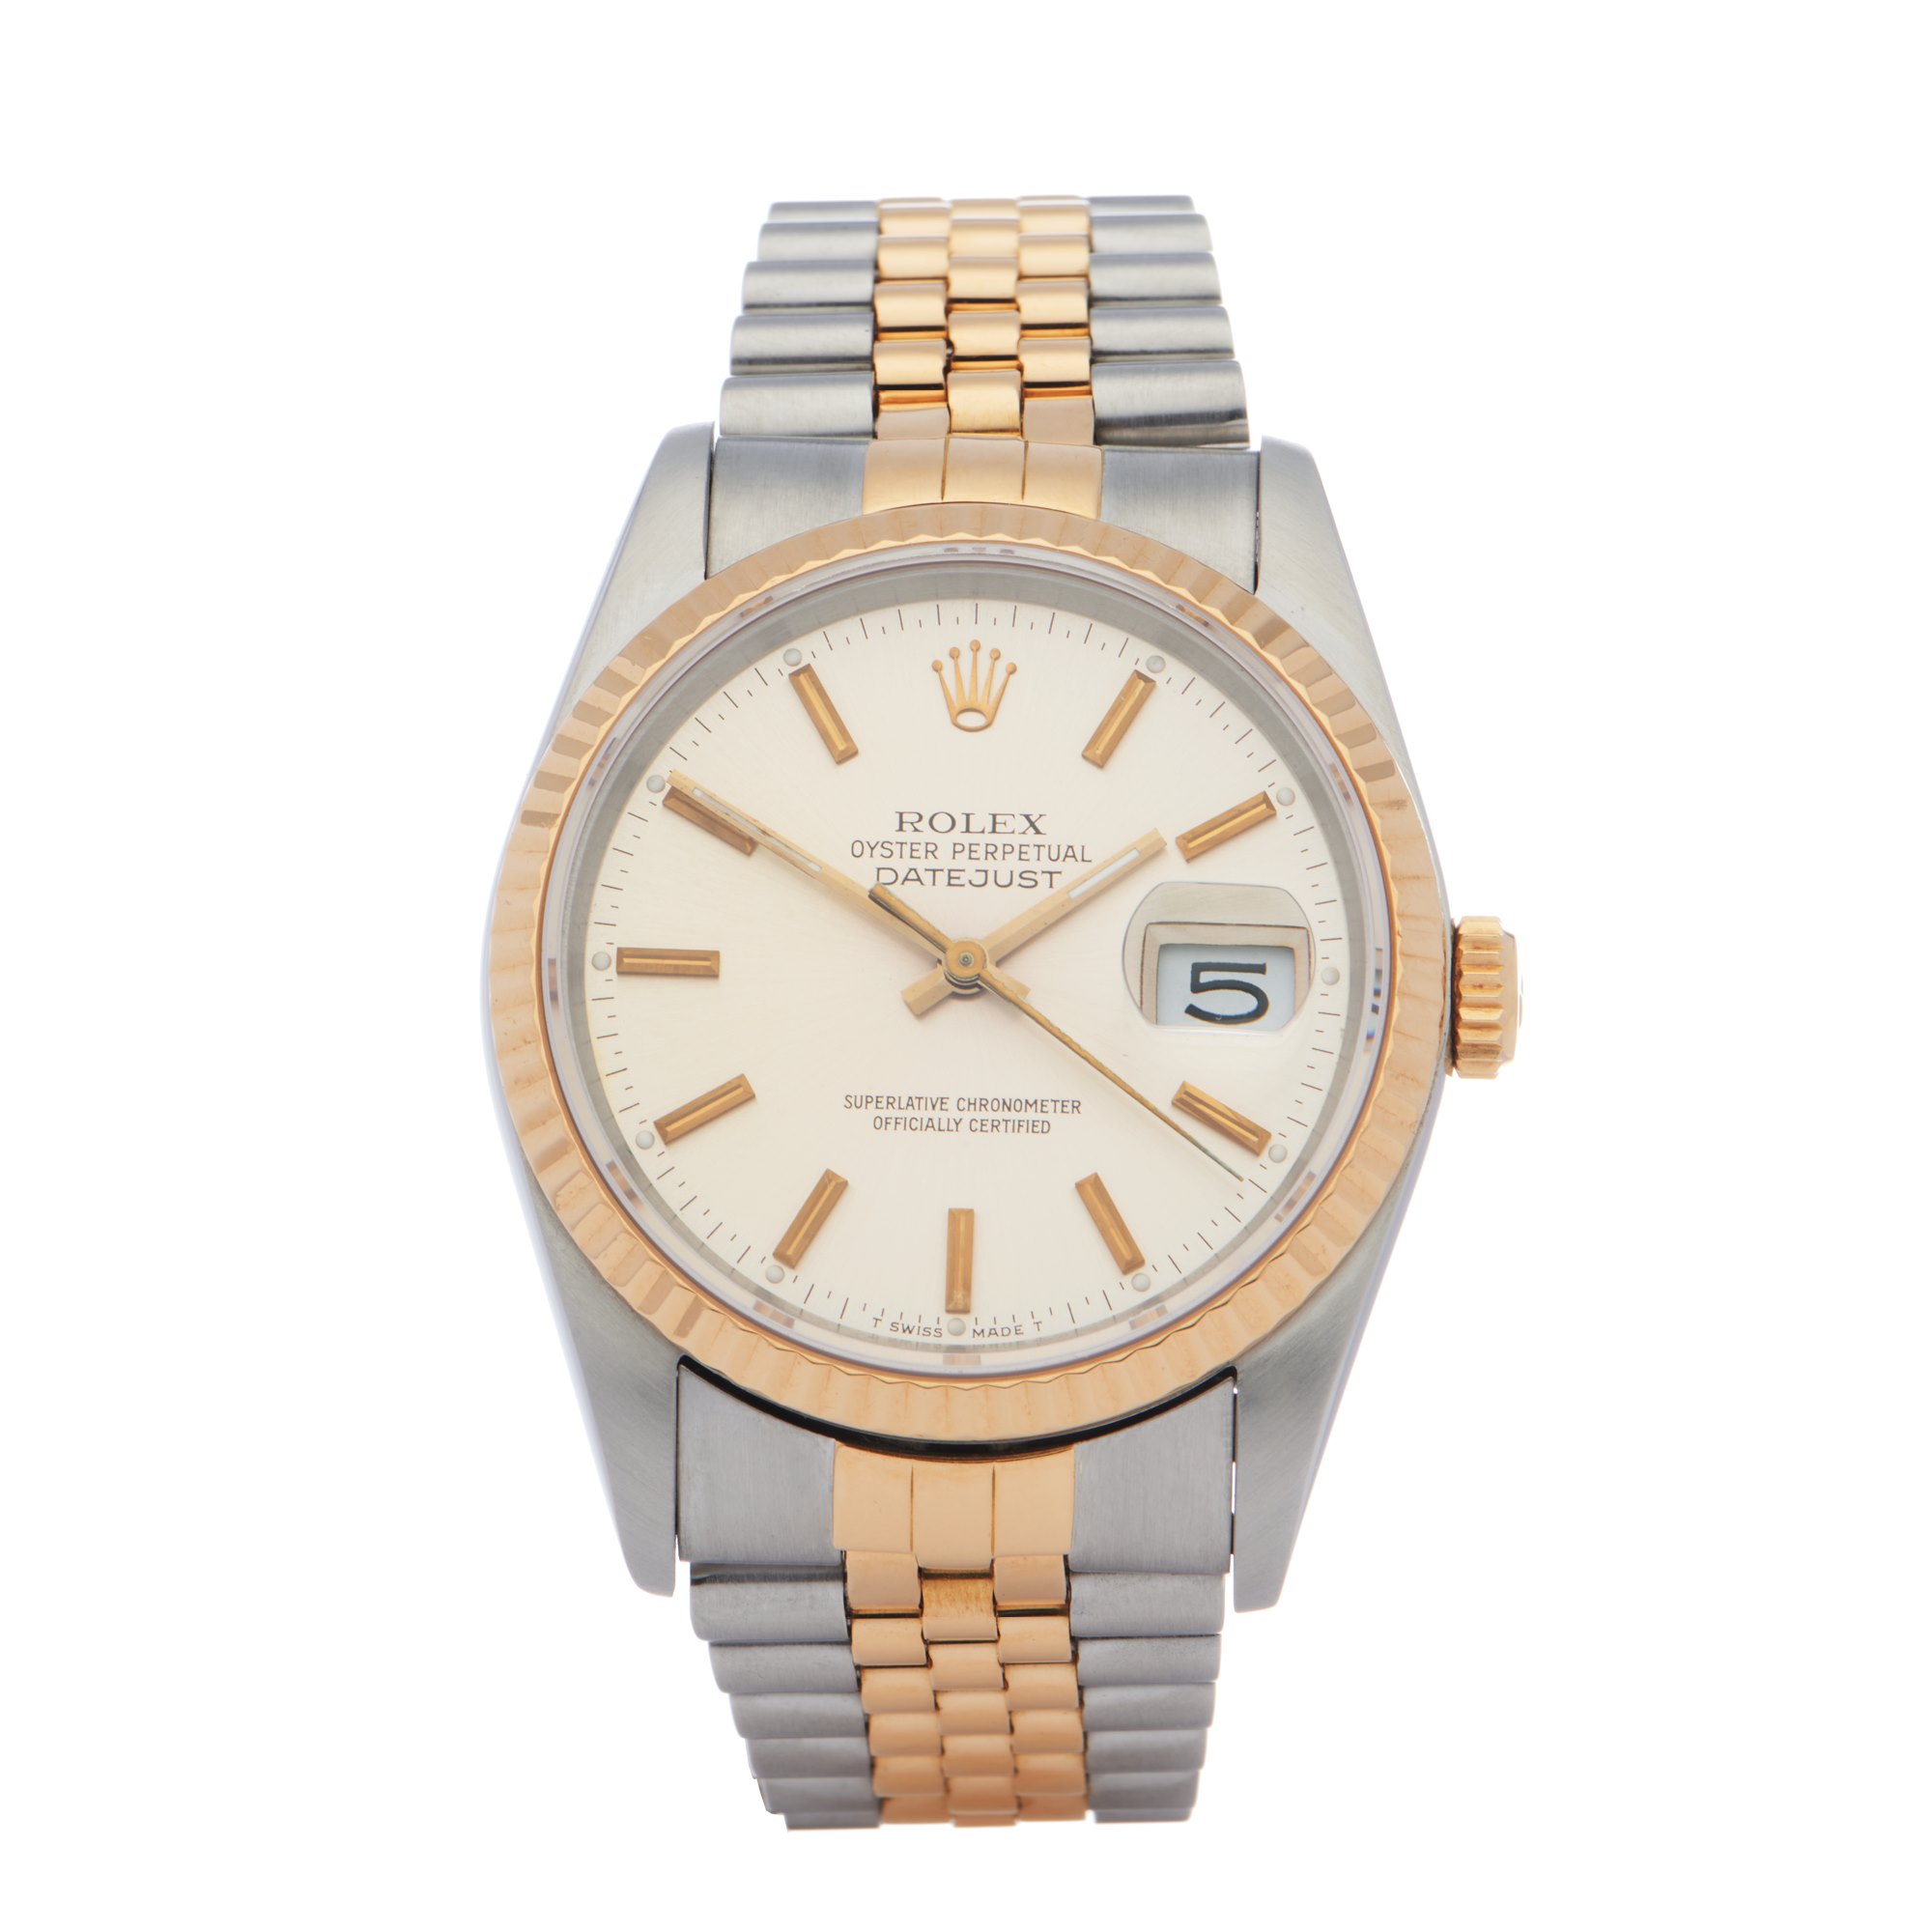 Rolex Datejust 18K Yellow Gold & Stainless Steel 16233